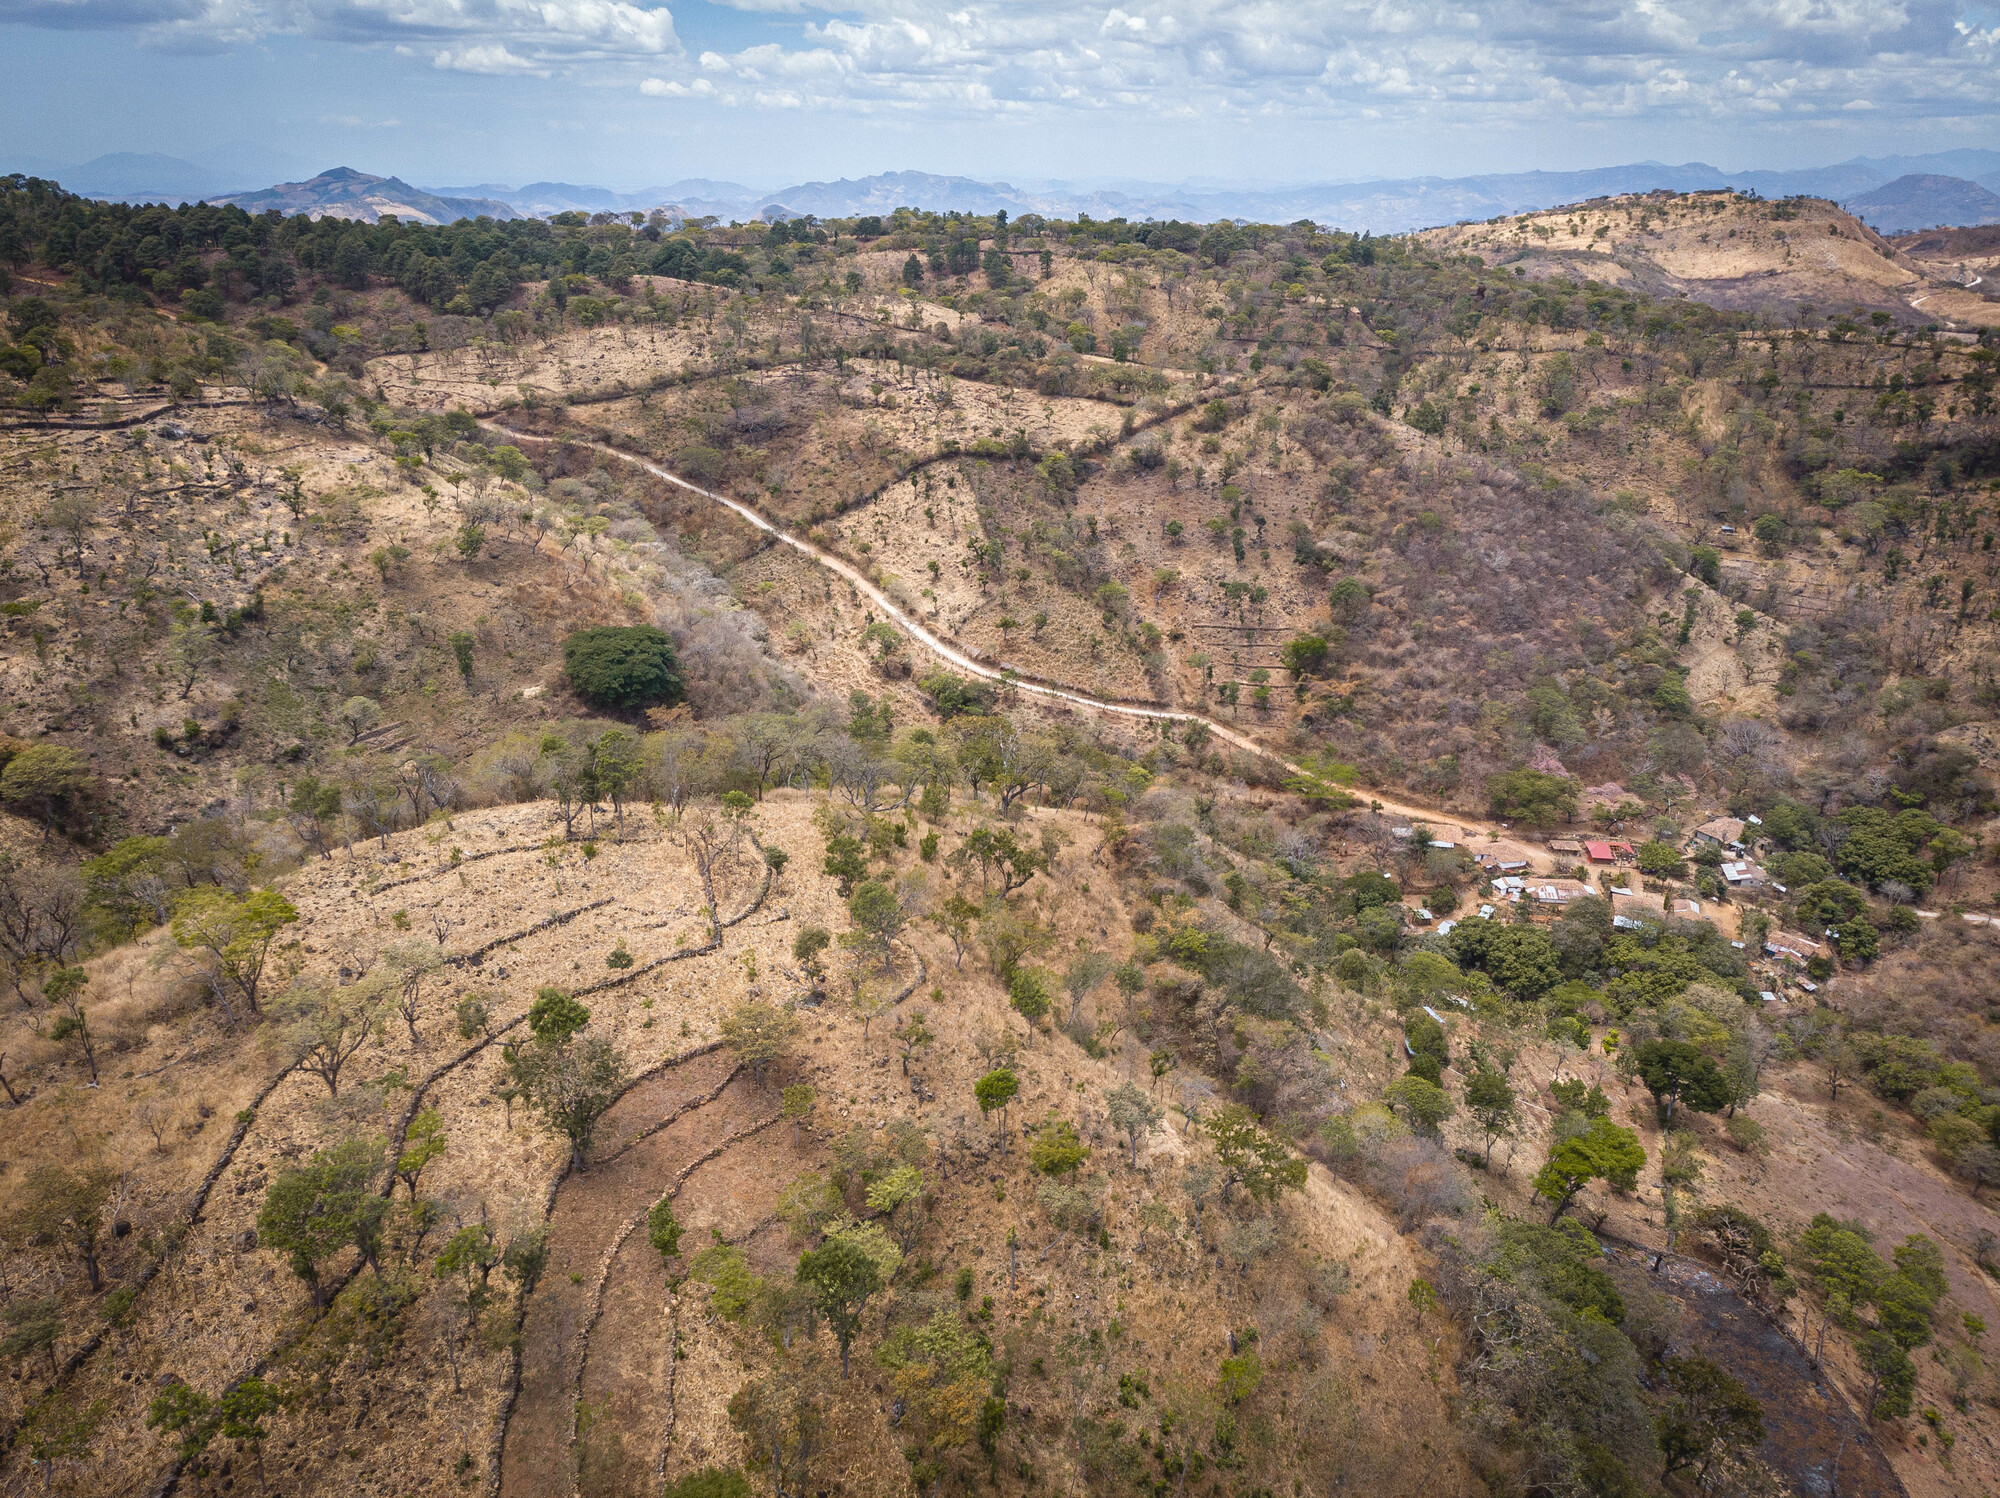 A bird's-eye view of stone erosion barriers in the countryside of Honduras